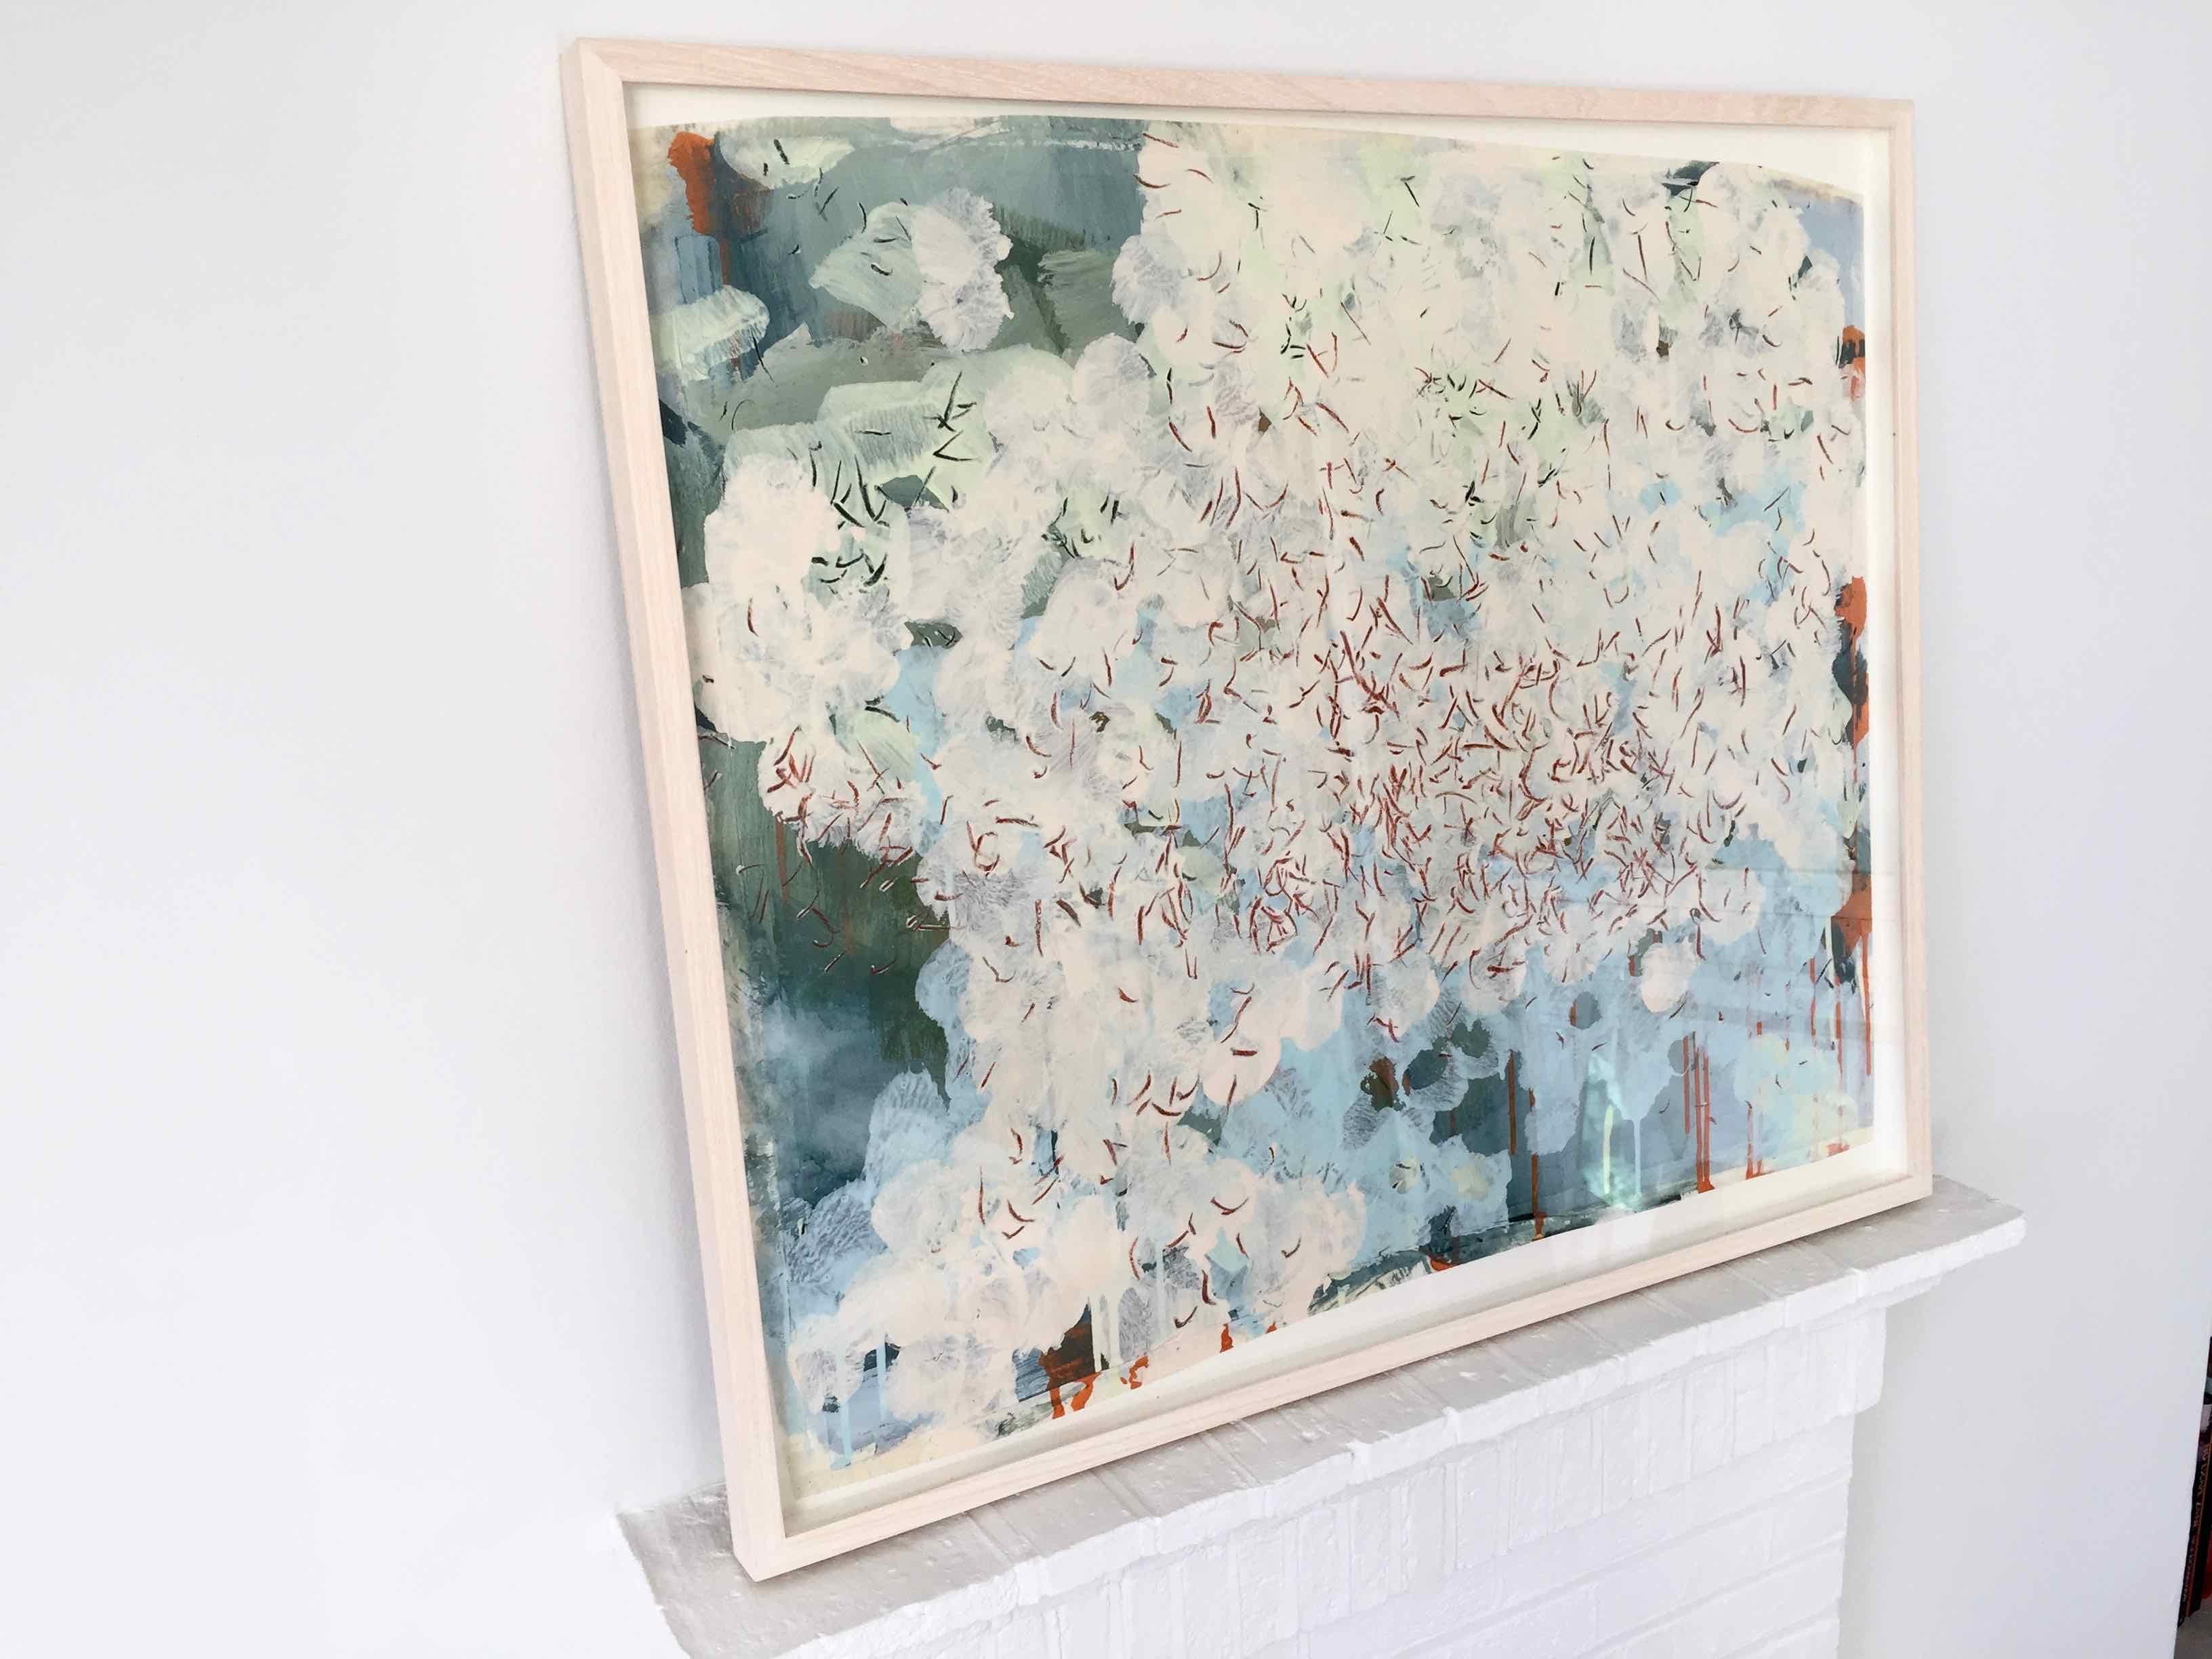 Swarm, Small White (Gran Sasso) 3, 2018, Gesso on paper, gouache, ink, Watercolour, 24 × 29 1/2 × 1 3/5 in; 61 × 75 × 4 cm by Sara Dudman RWA

Whilst on a residency in Italy, Sara Dudman saw a swarm of white butterflies and was fascinated by their